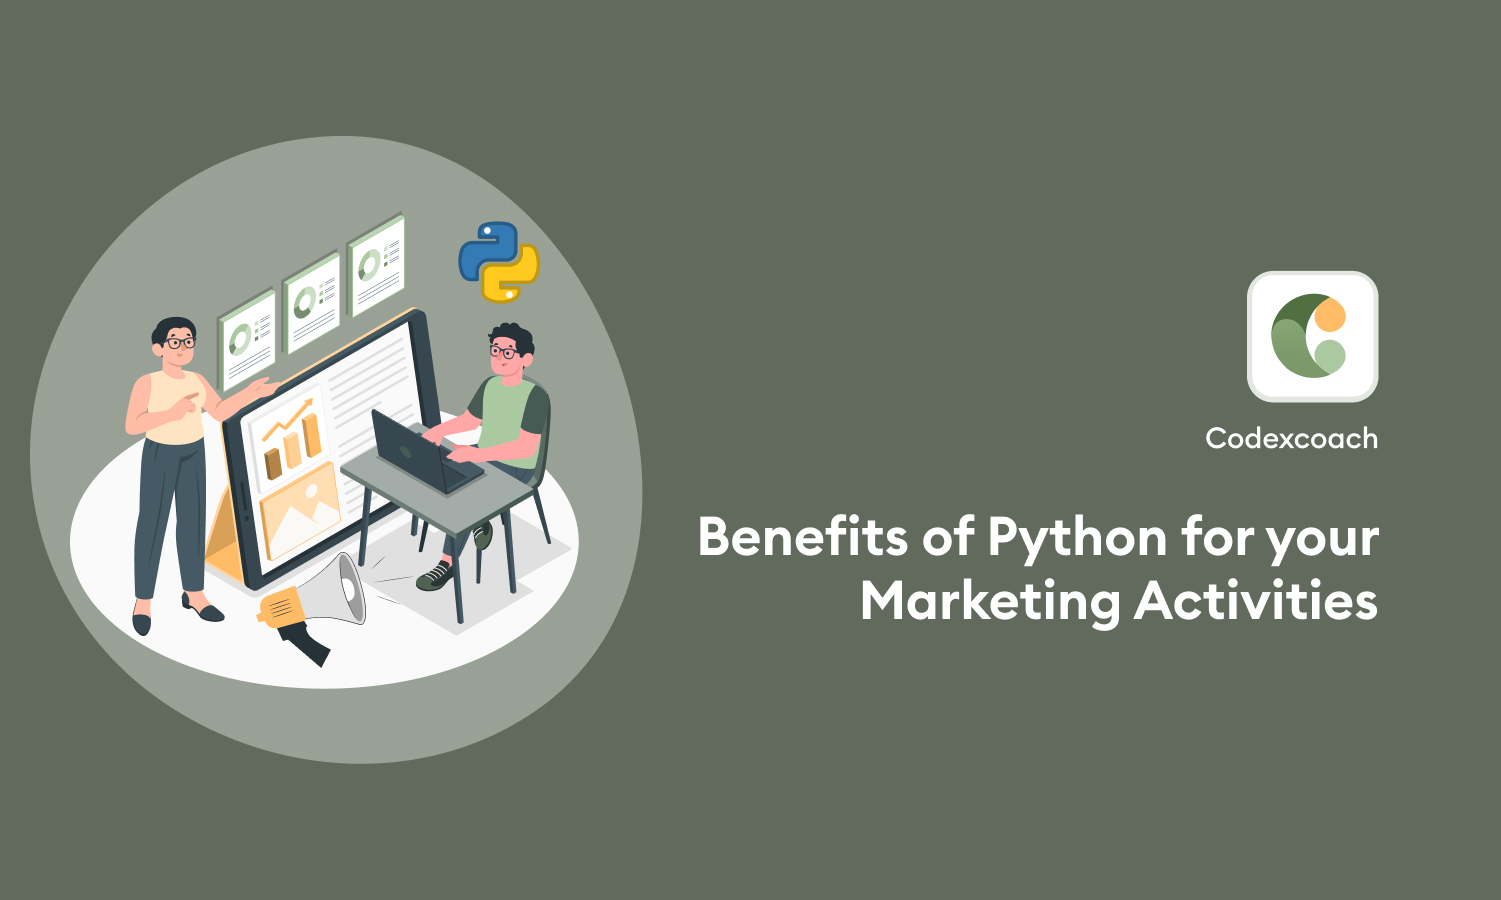 Benefits of Python for your Marketing Activities